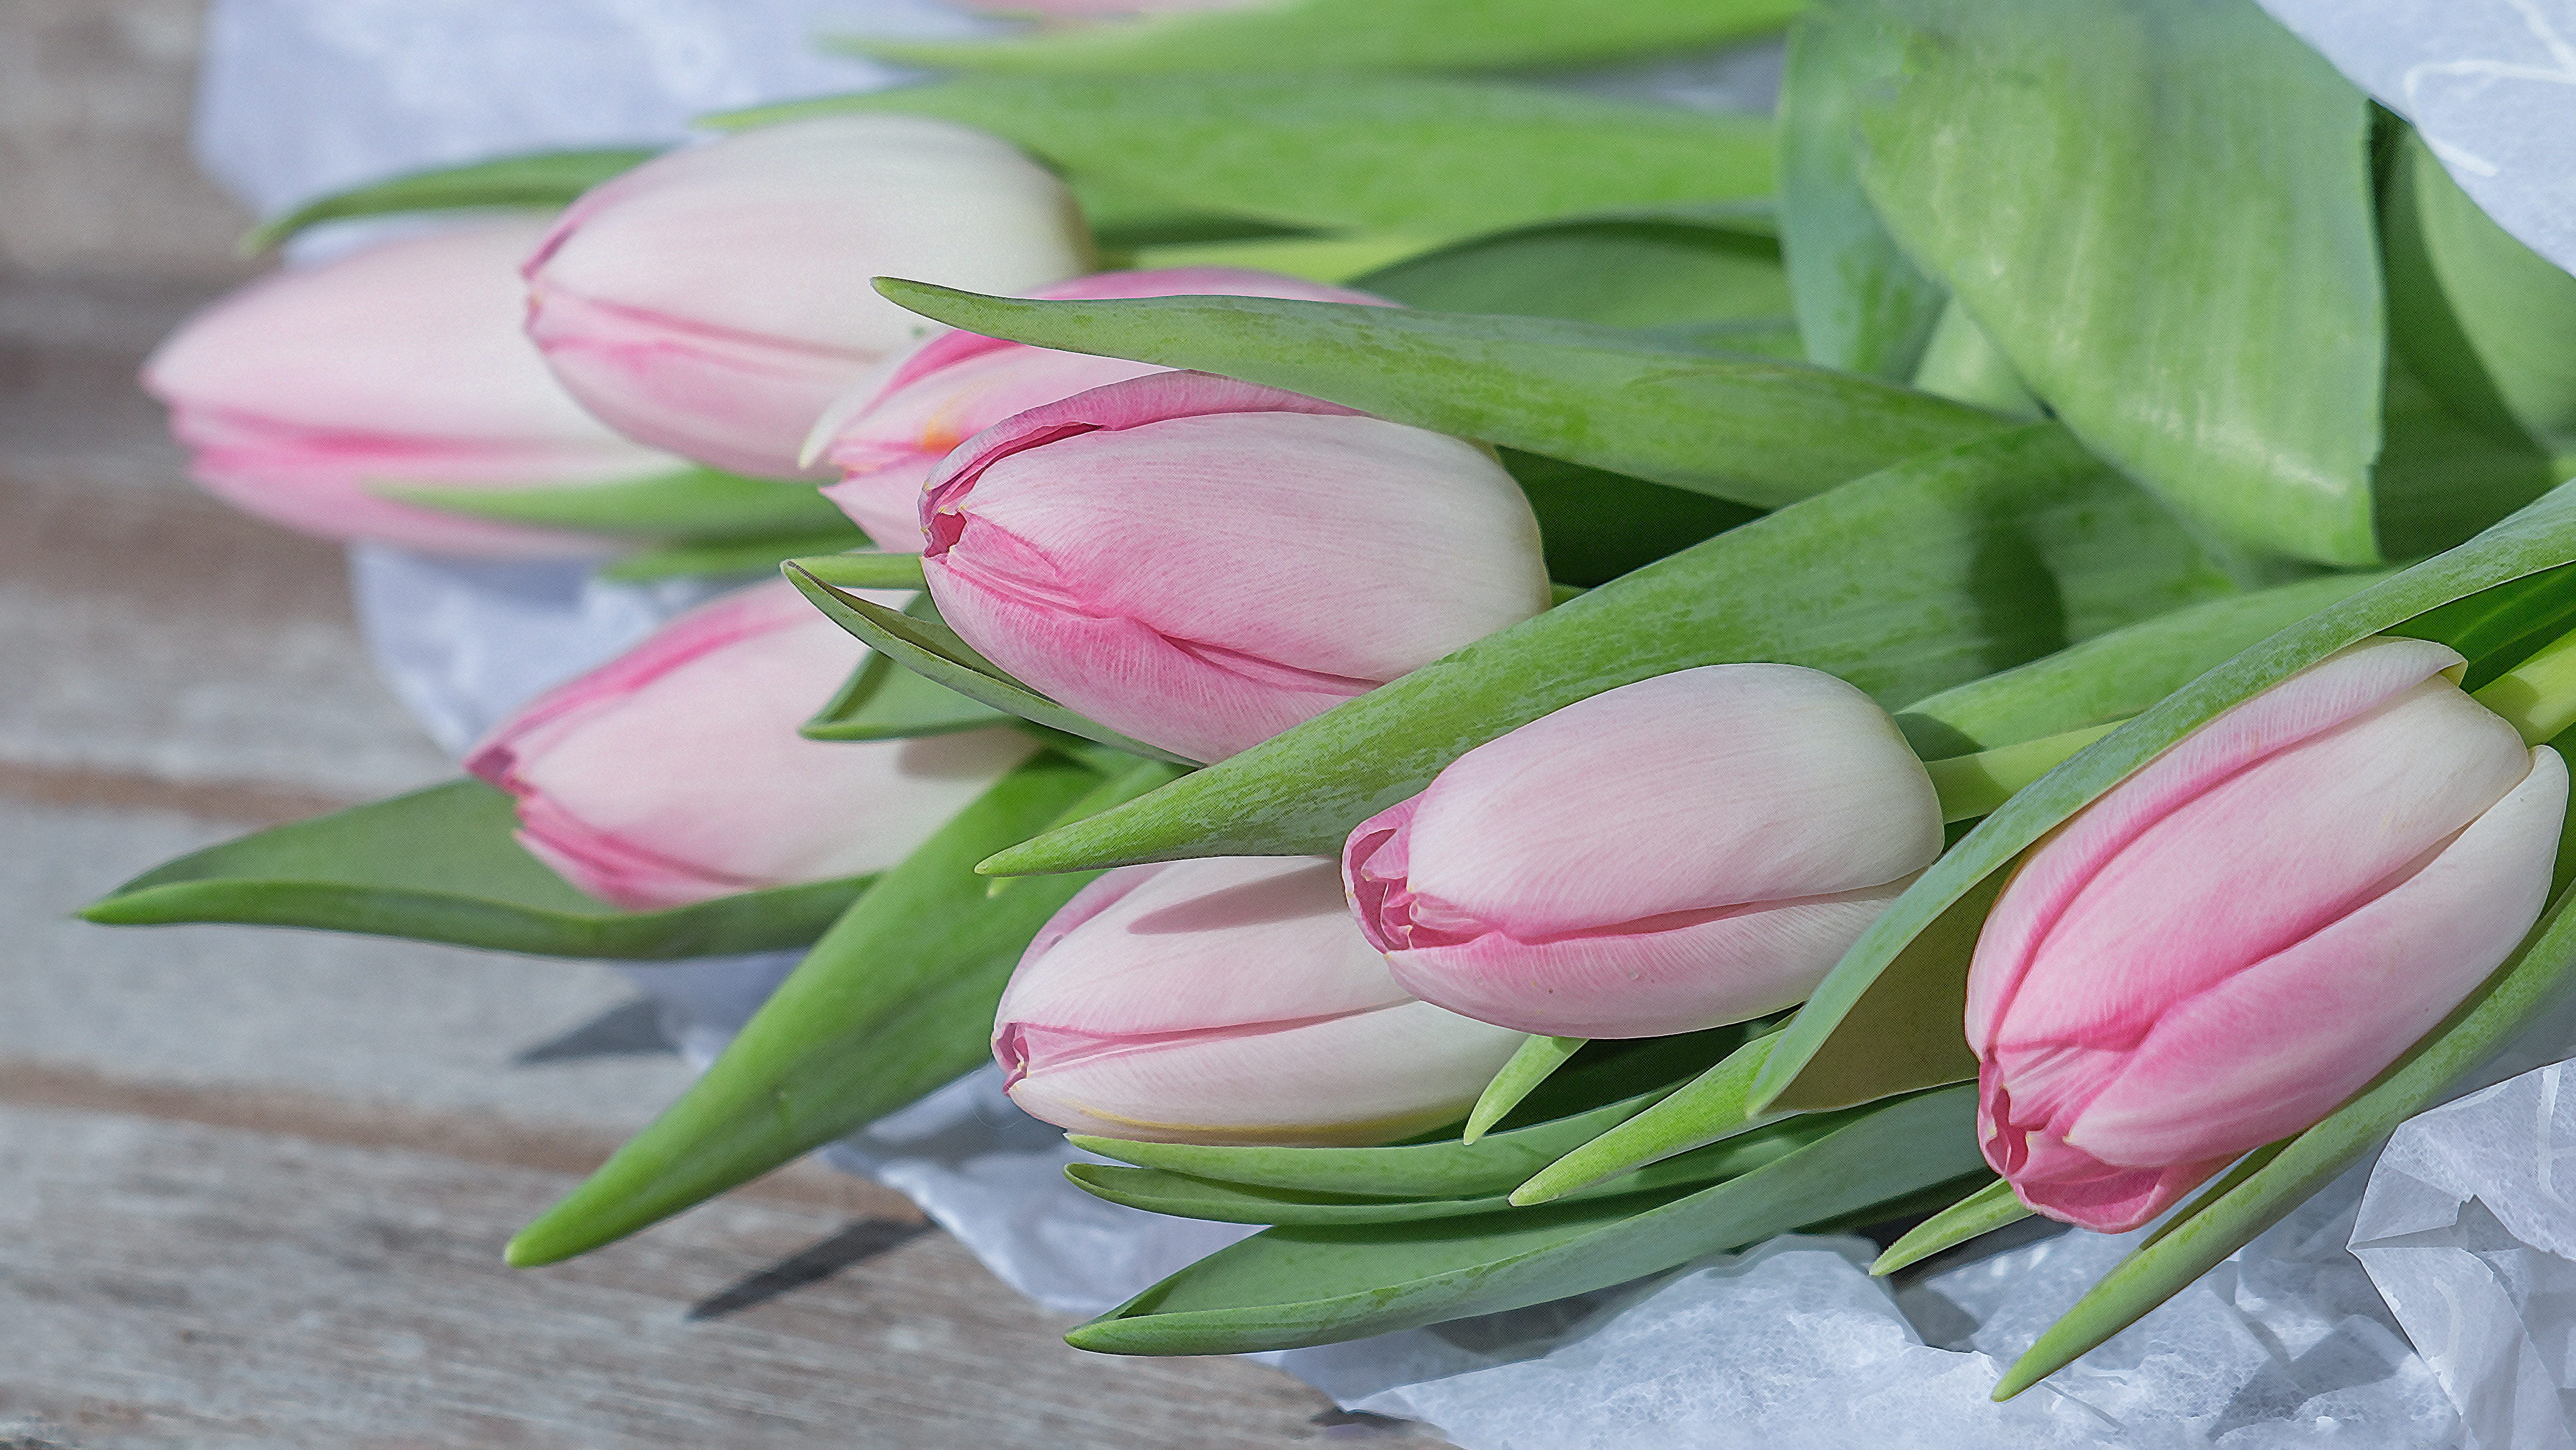 pink and white tulips on brown wooden surface, flower, floral